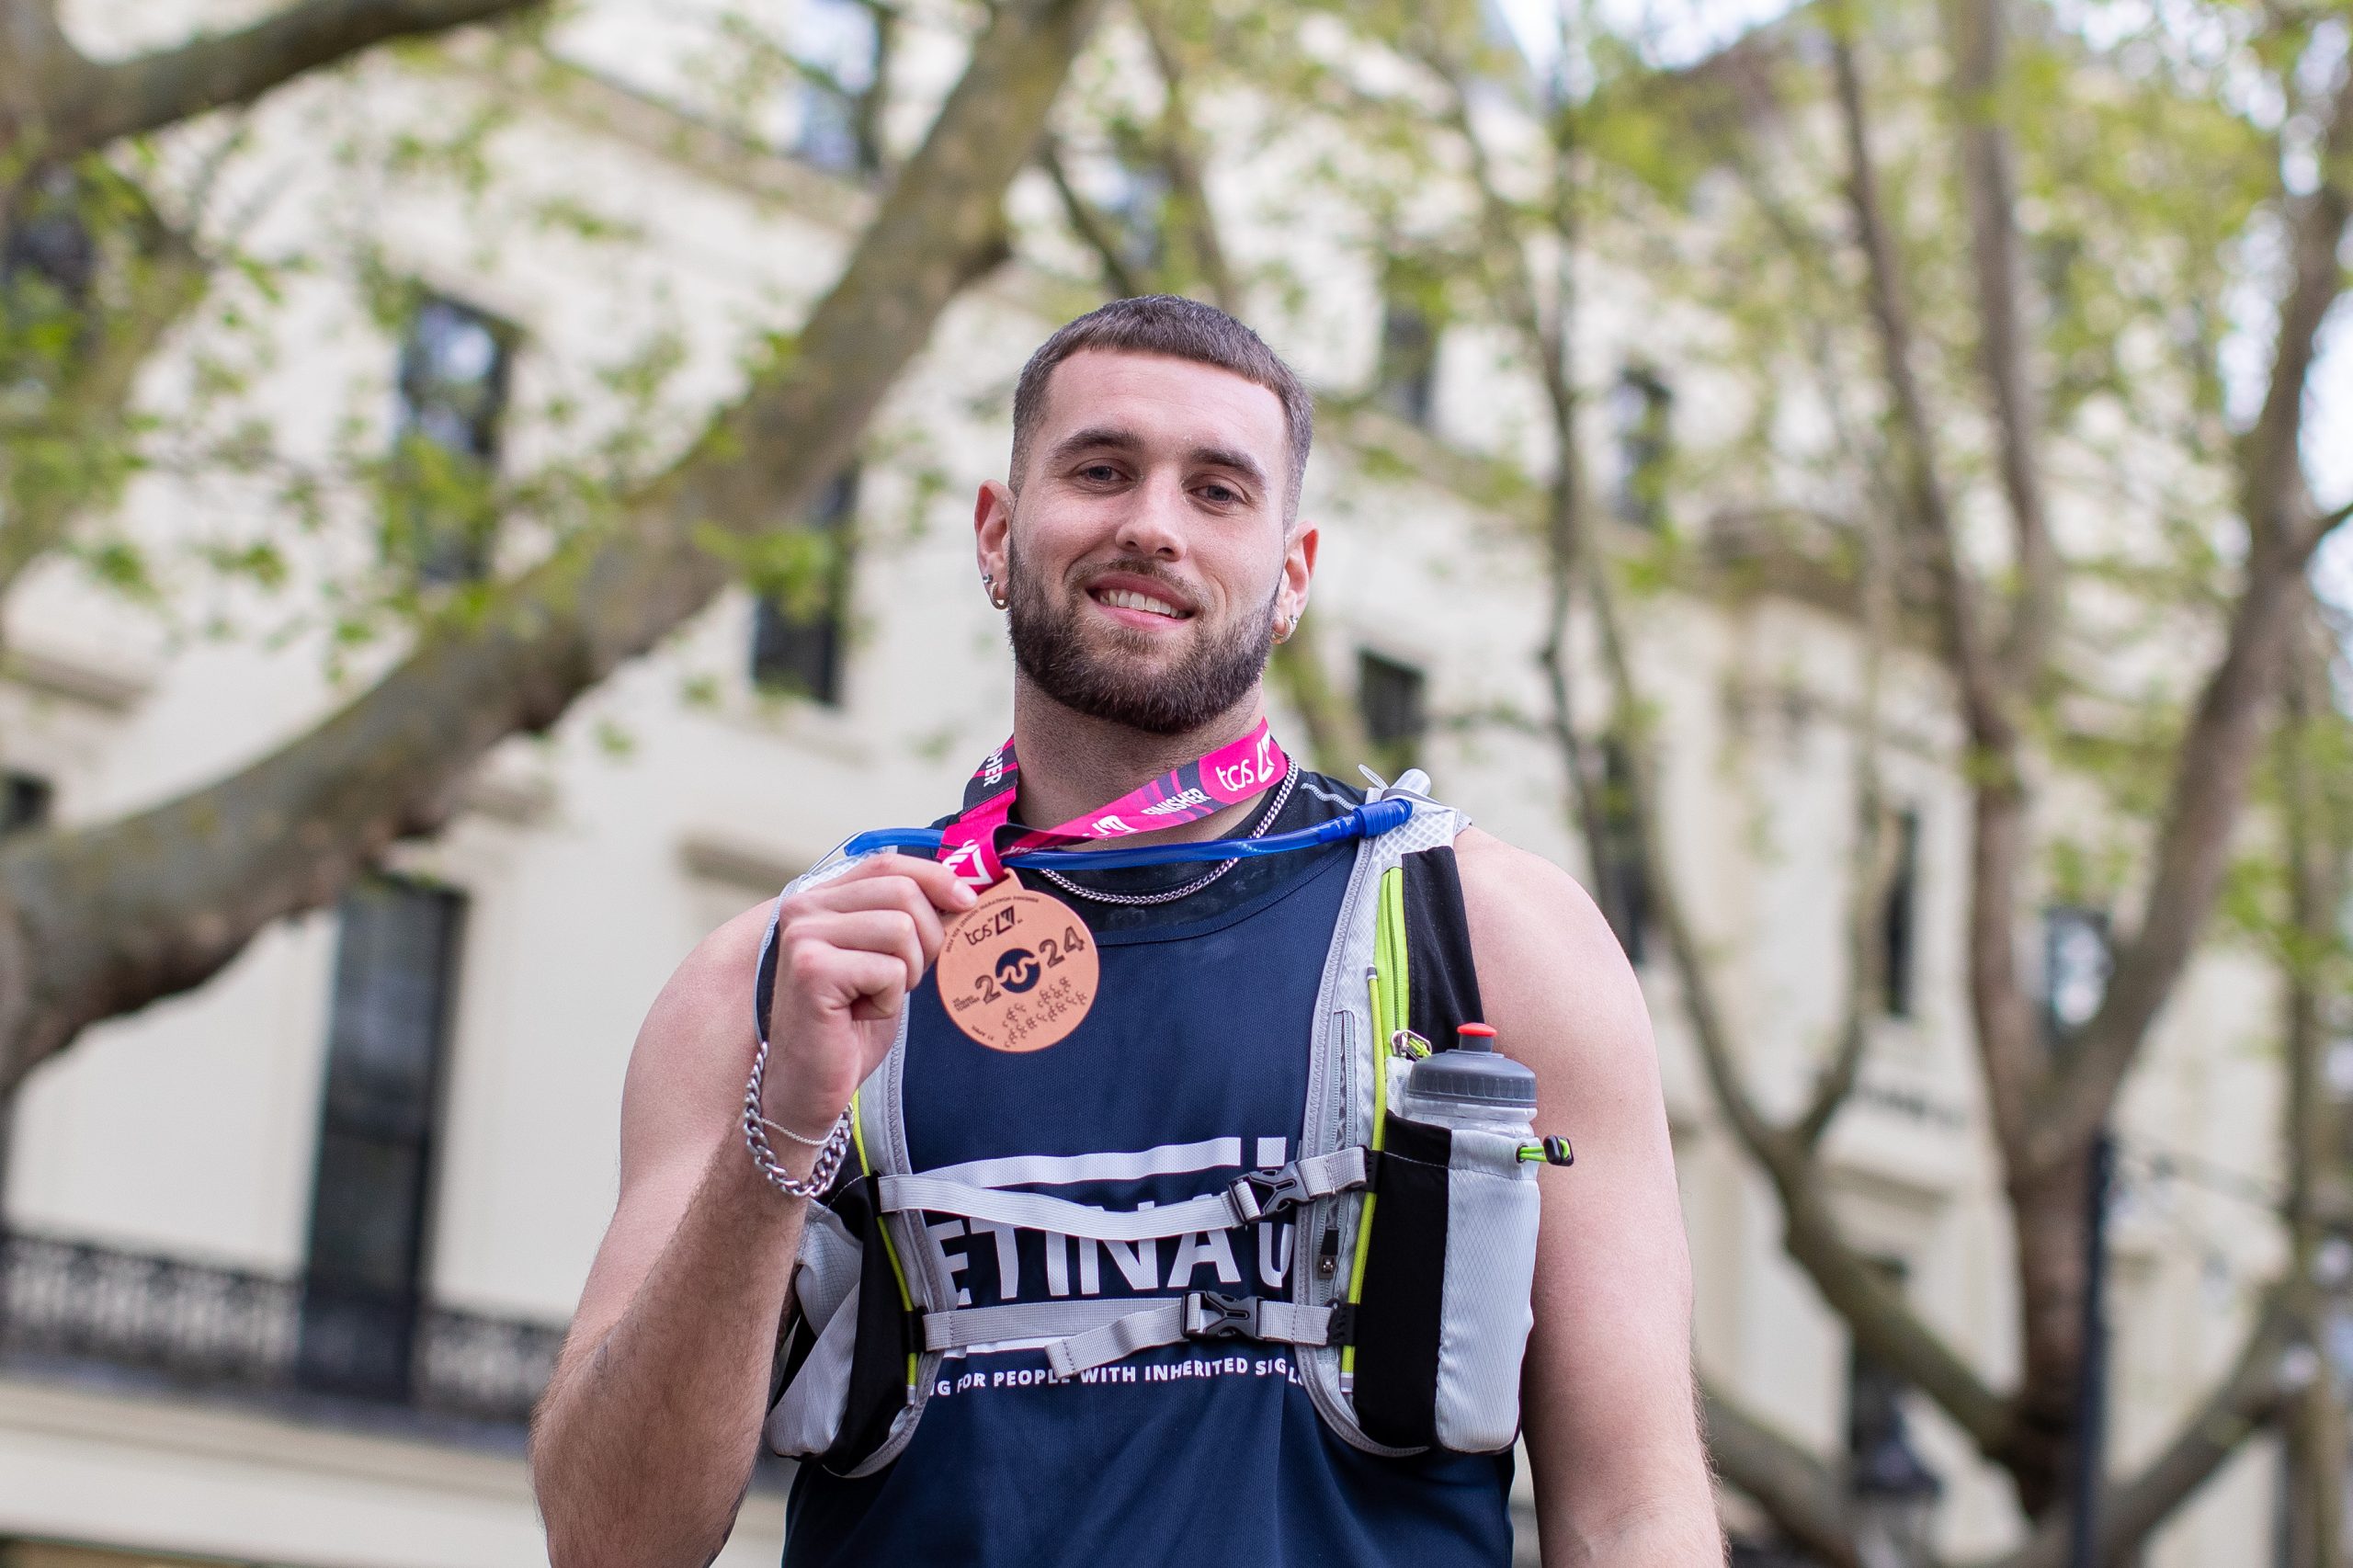 A male runner smiles as he holds his Marathon medal.